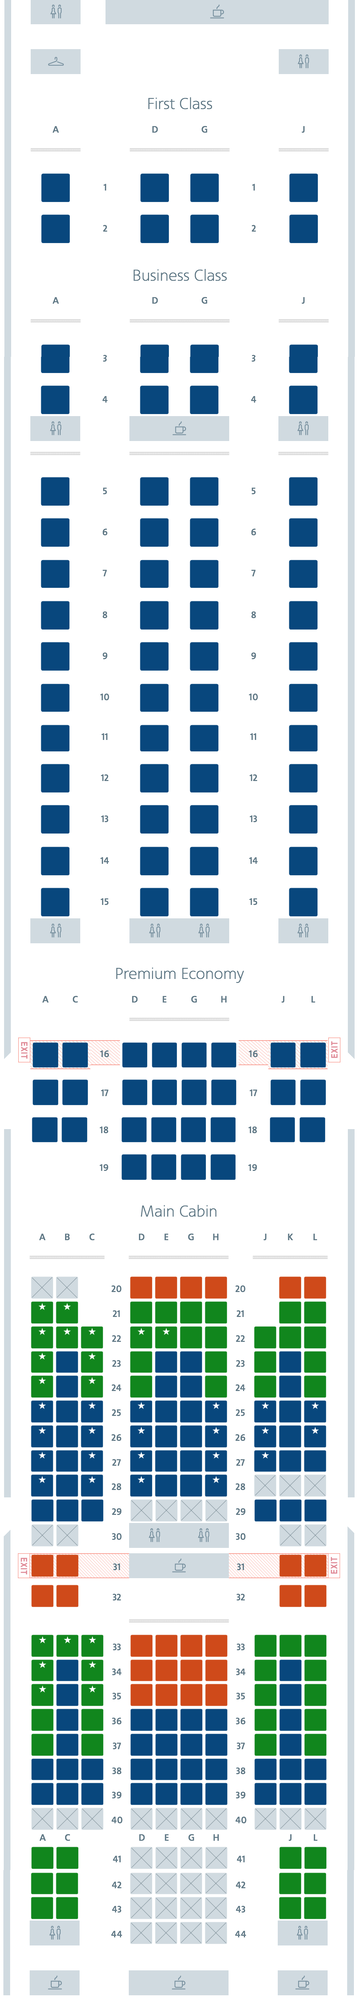 American Airlines Seating Chart 772